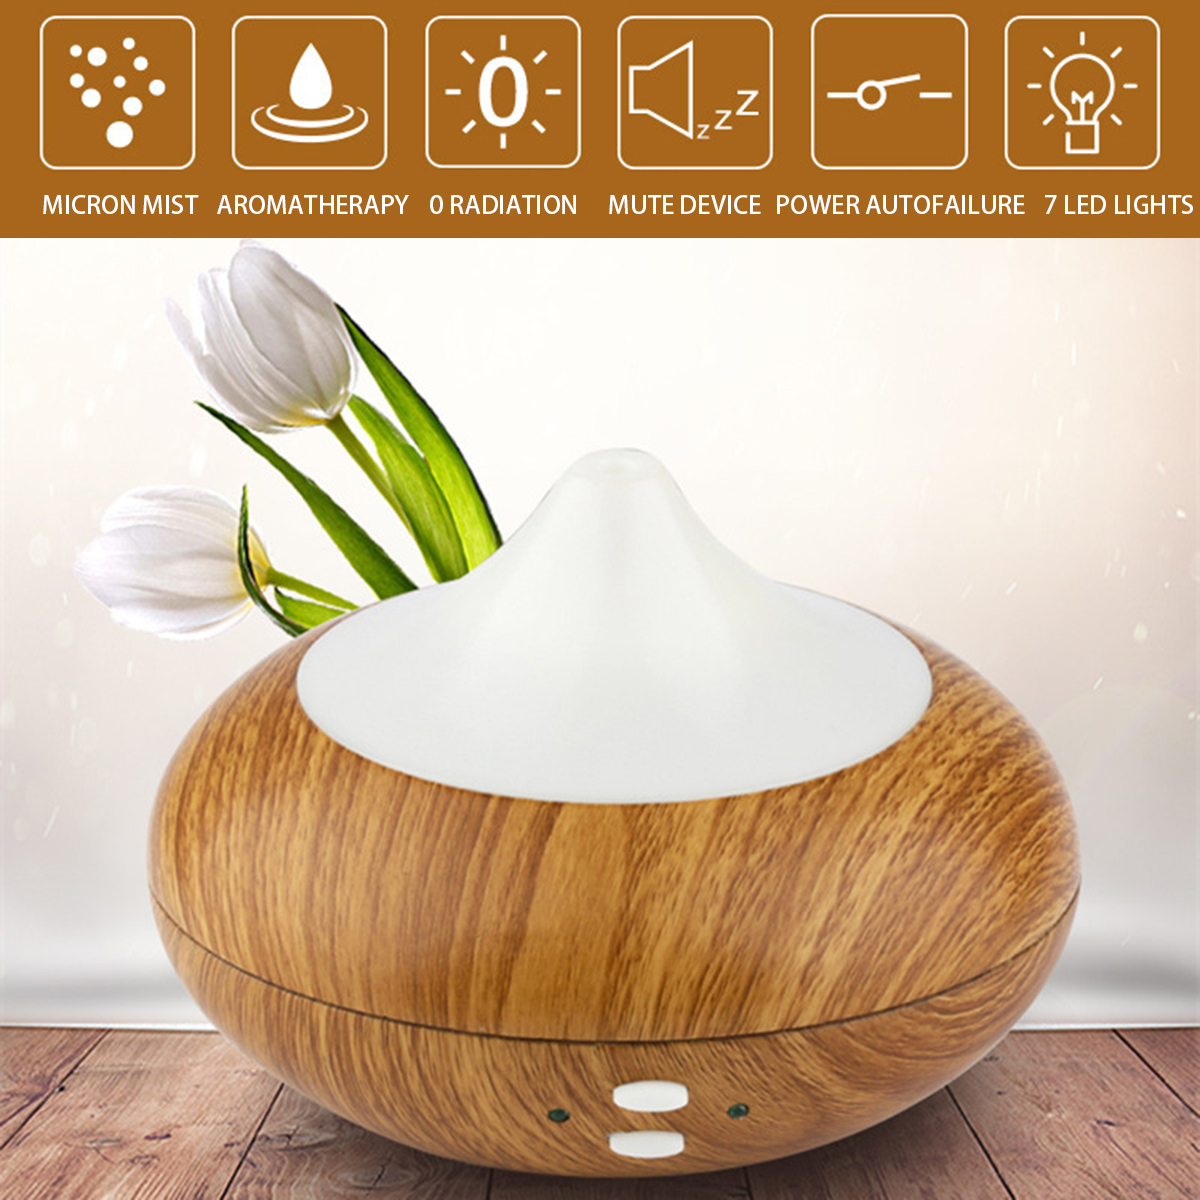 7 Colour LED Oil Ultrasonic Aroma Aromatherapy Diffuser Air Humidifier Purifier 16